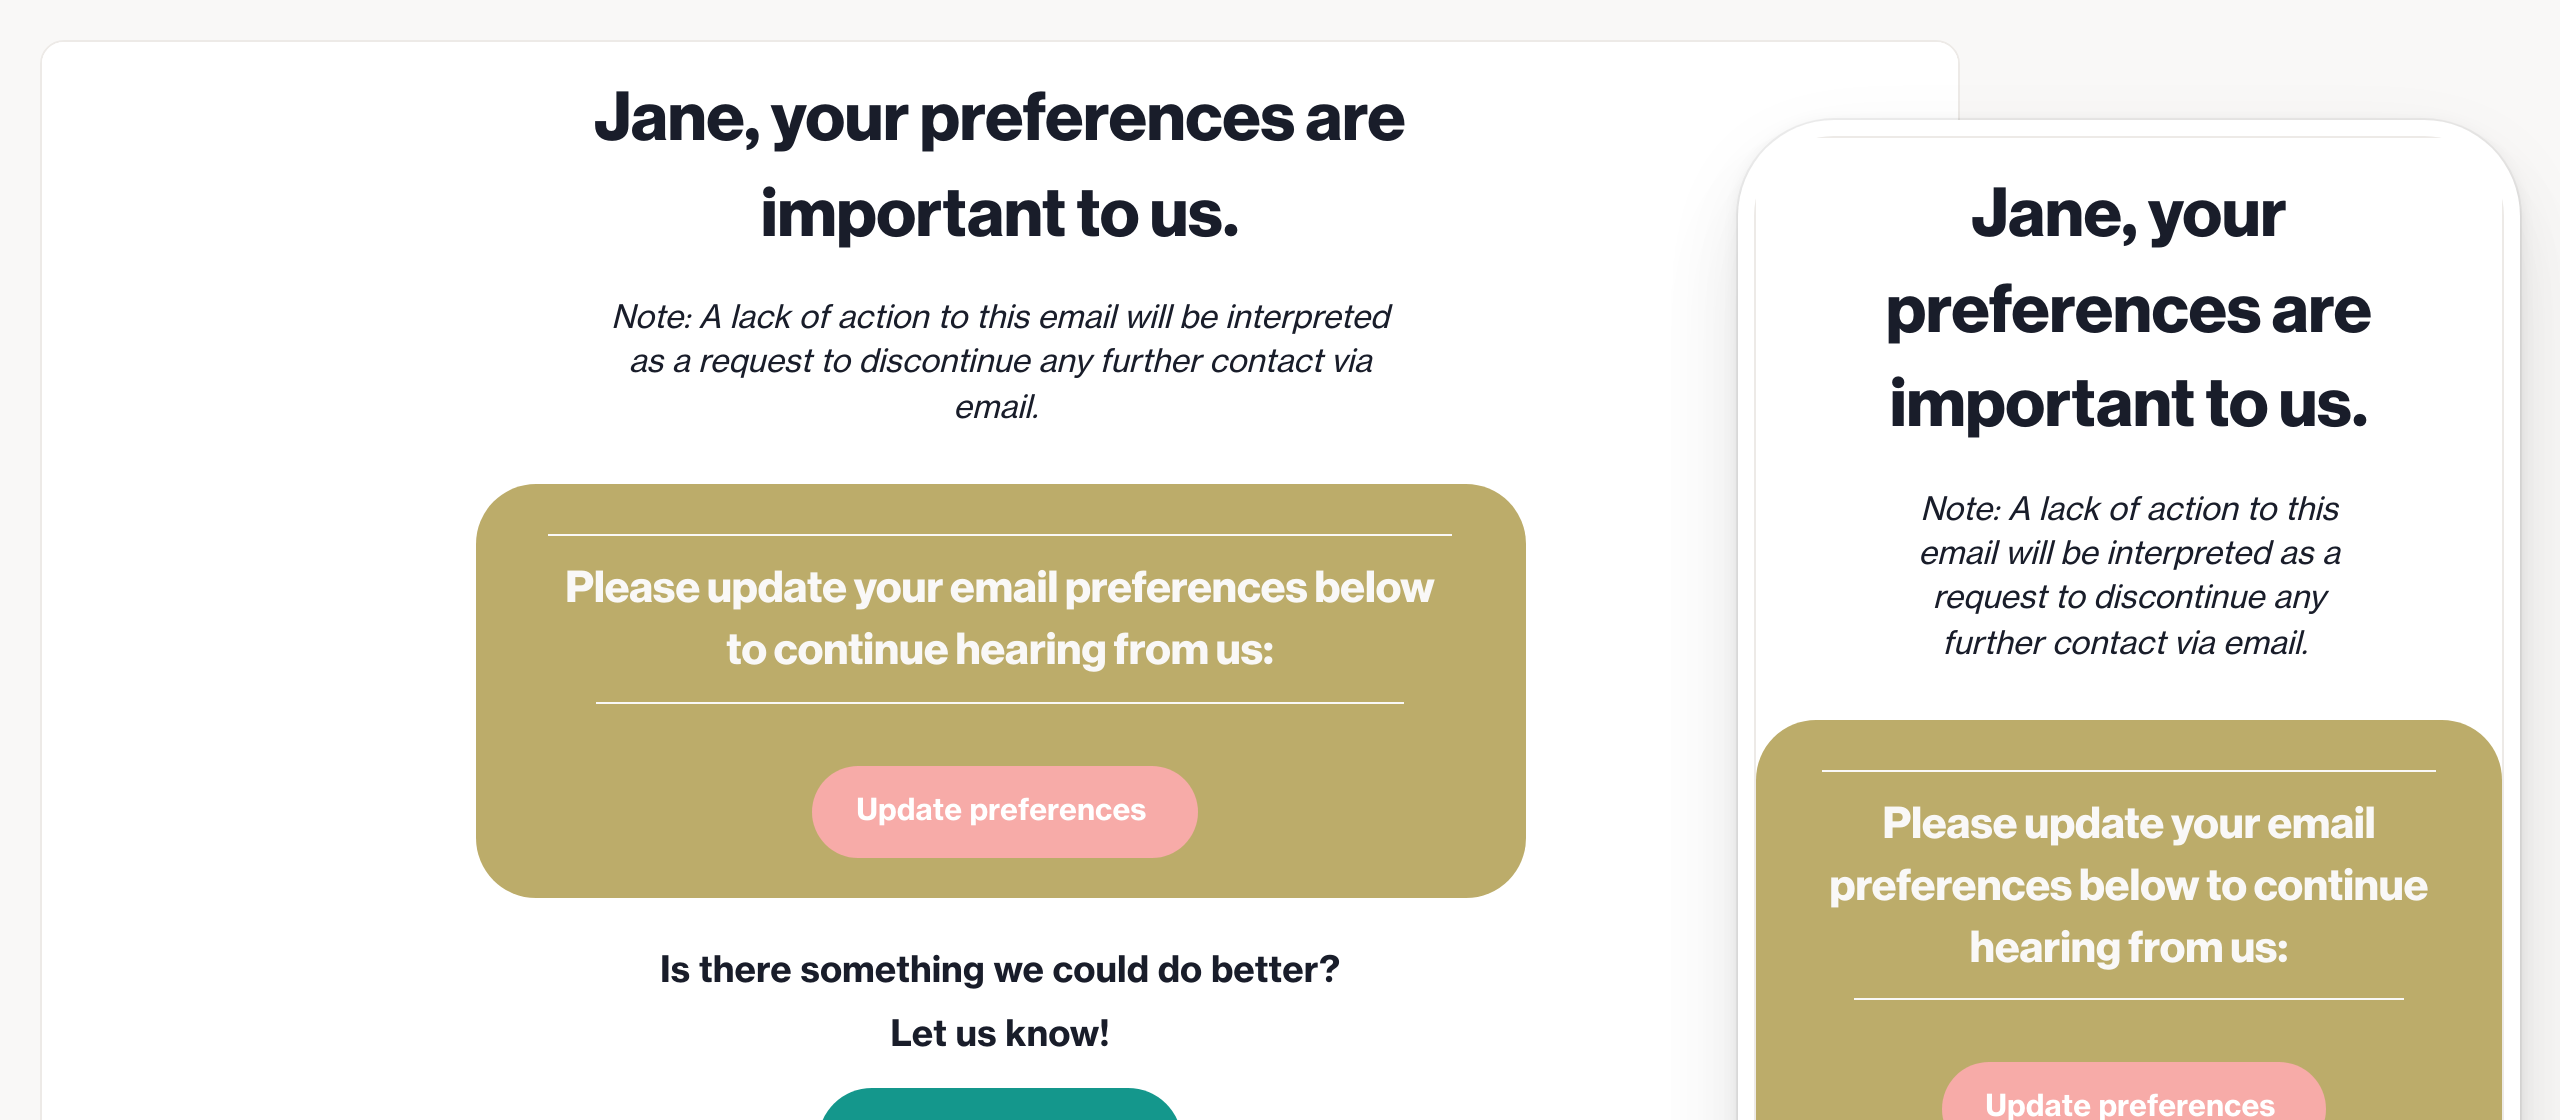 Email preference update